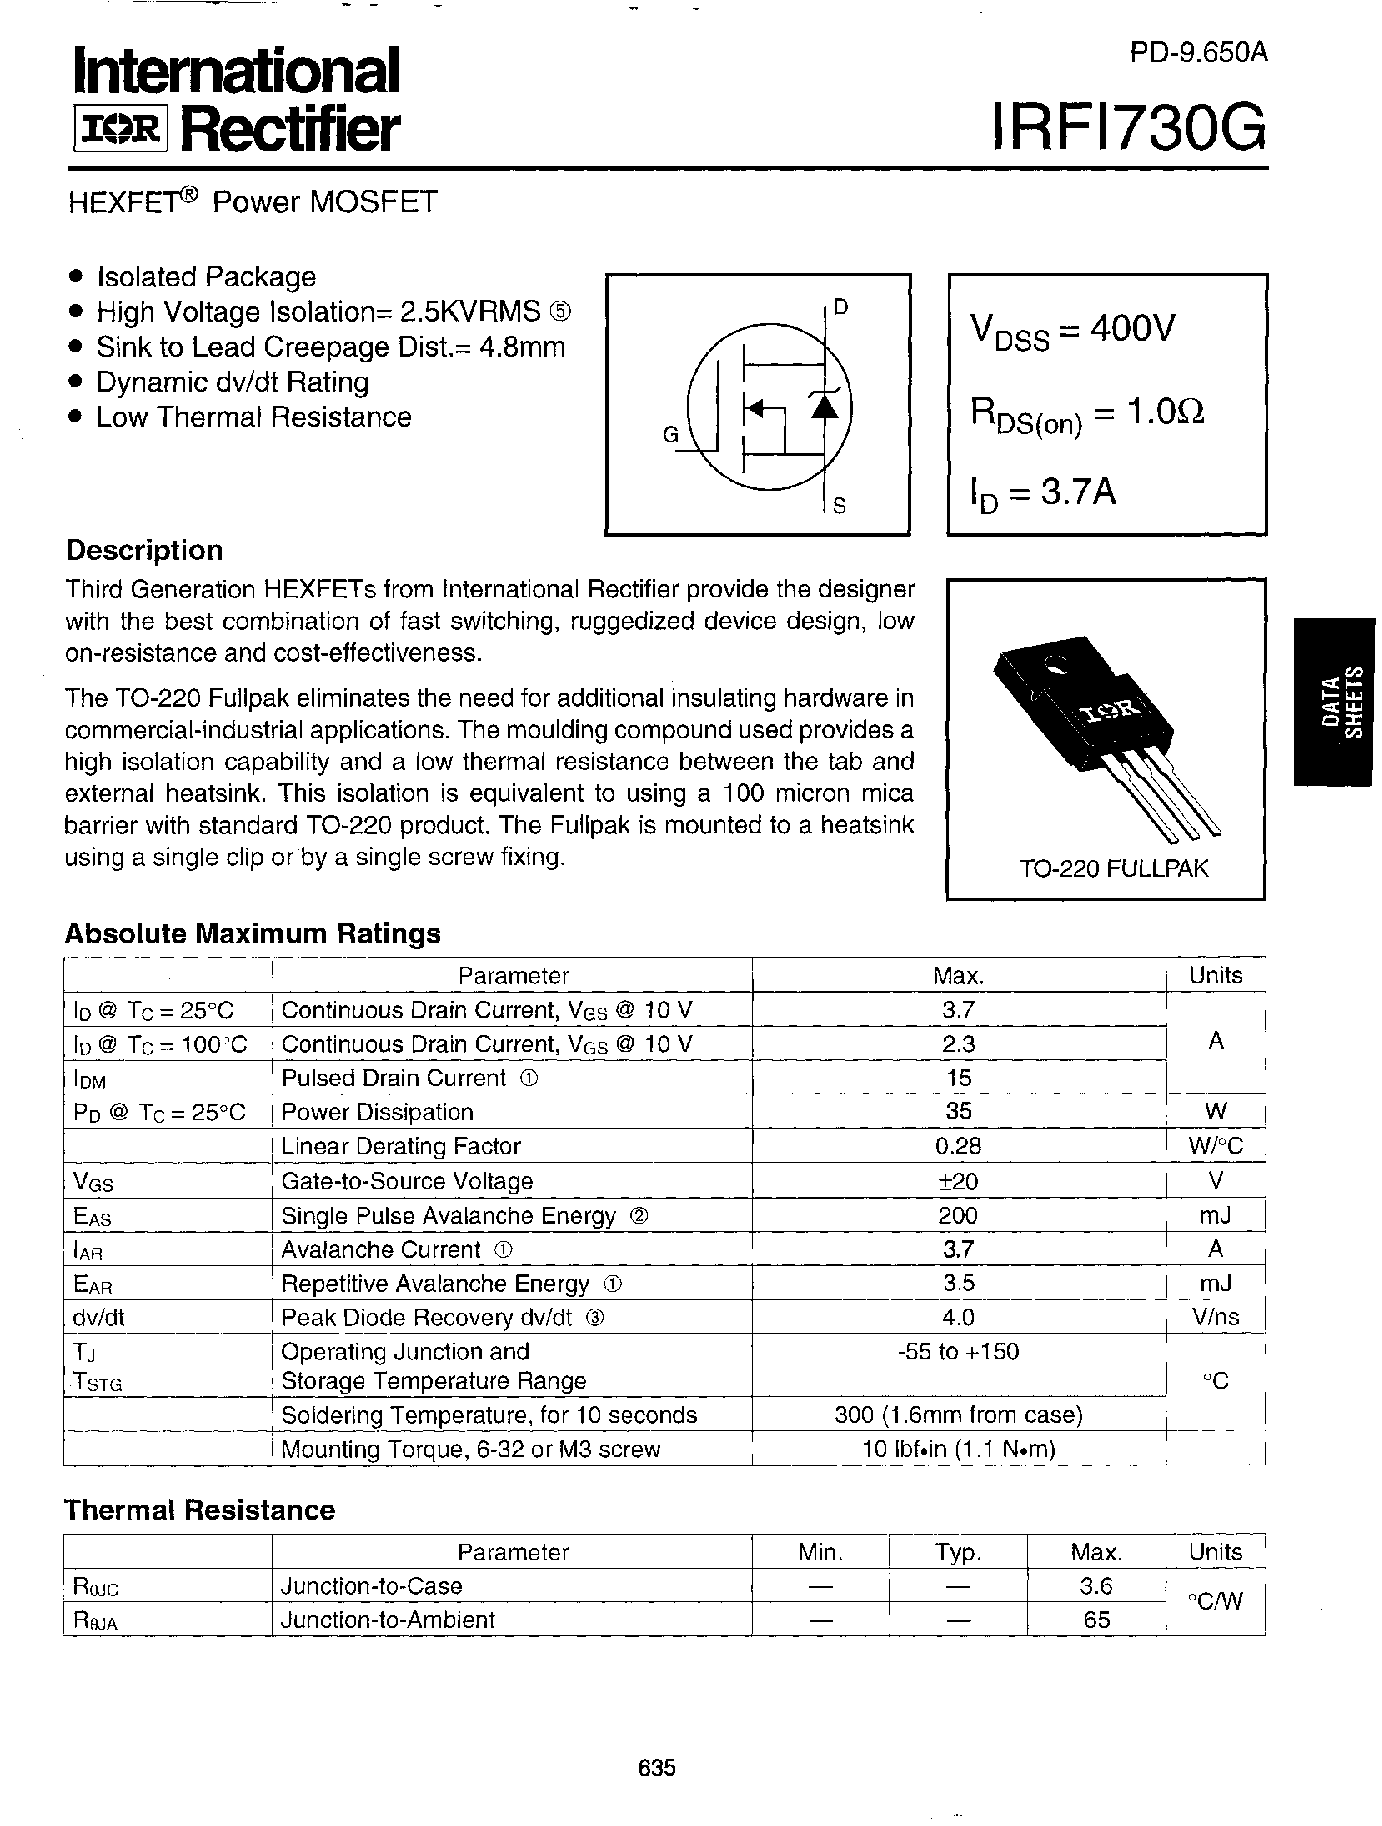 Datasheet IRF1730G - Power MOSFET(Vdss=400V/ Rds(on)=1.0ohm/ Id=3.7A) page 1